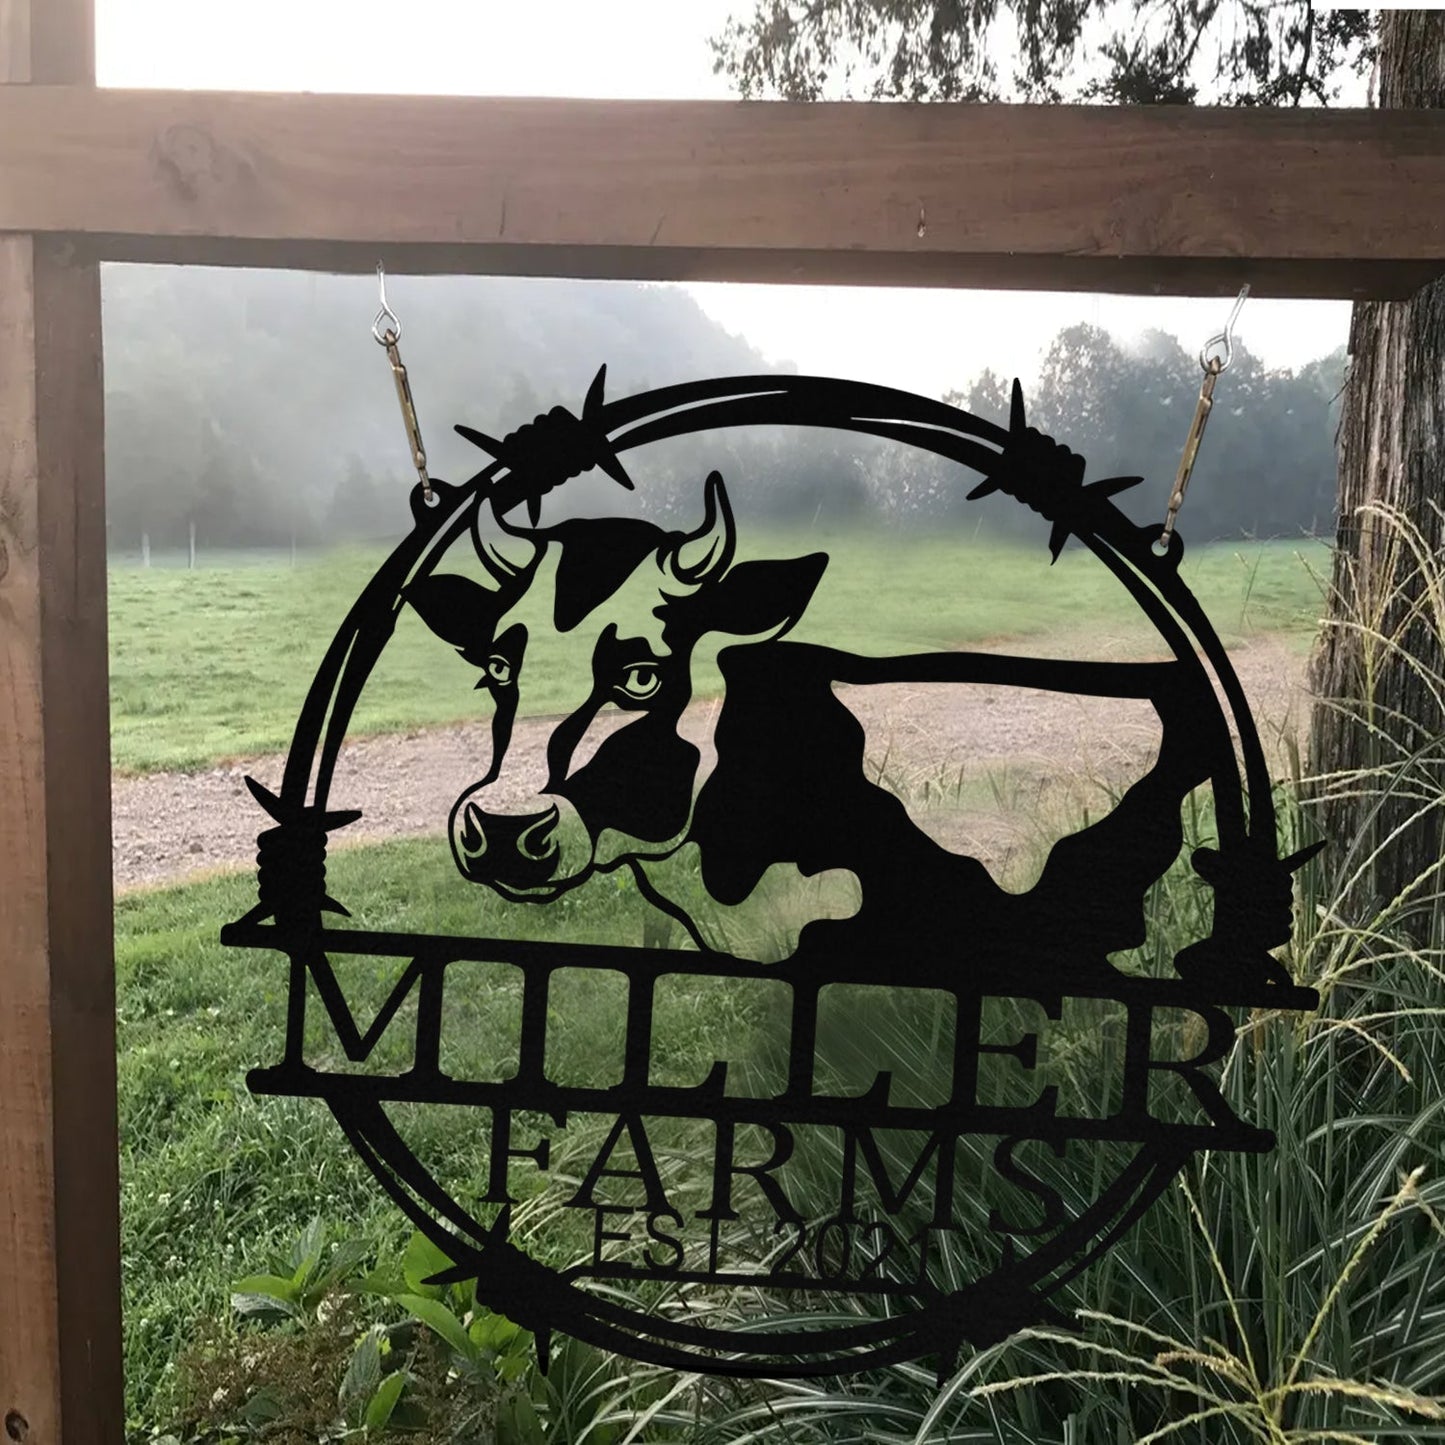 Personalized Metal Farm Sign Dairy Cow Cattle Monogram Custom Outdoor Farmhouse Front Gate Entry Road Wall Decor Art Gift